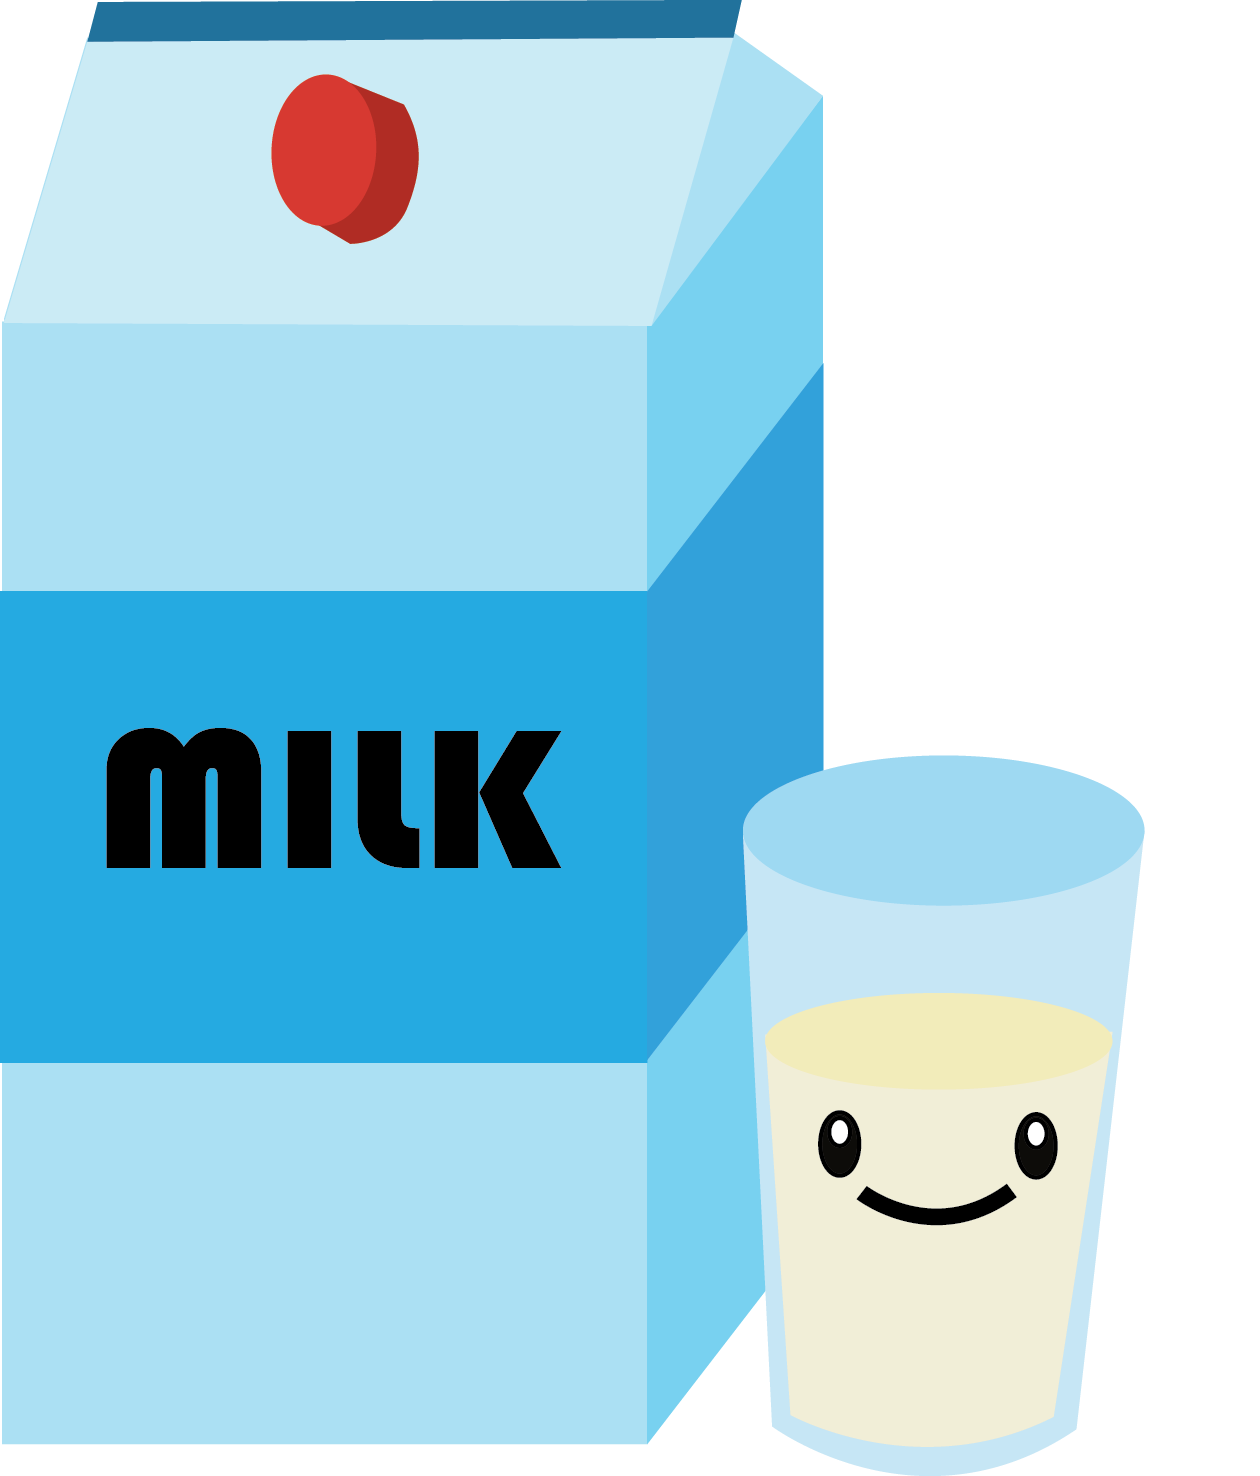 Milk low fat graphics. Nutrition clipart grocery